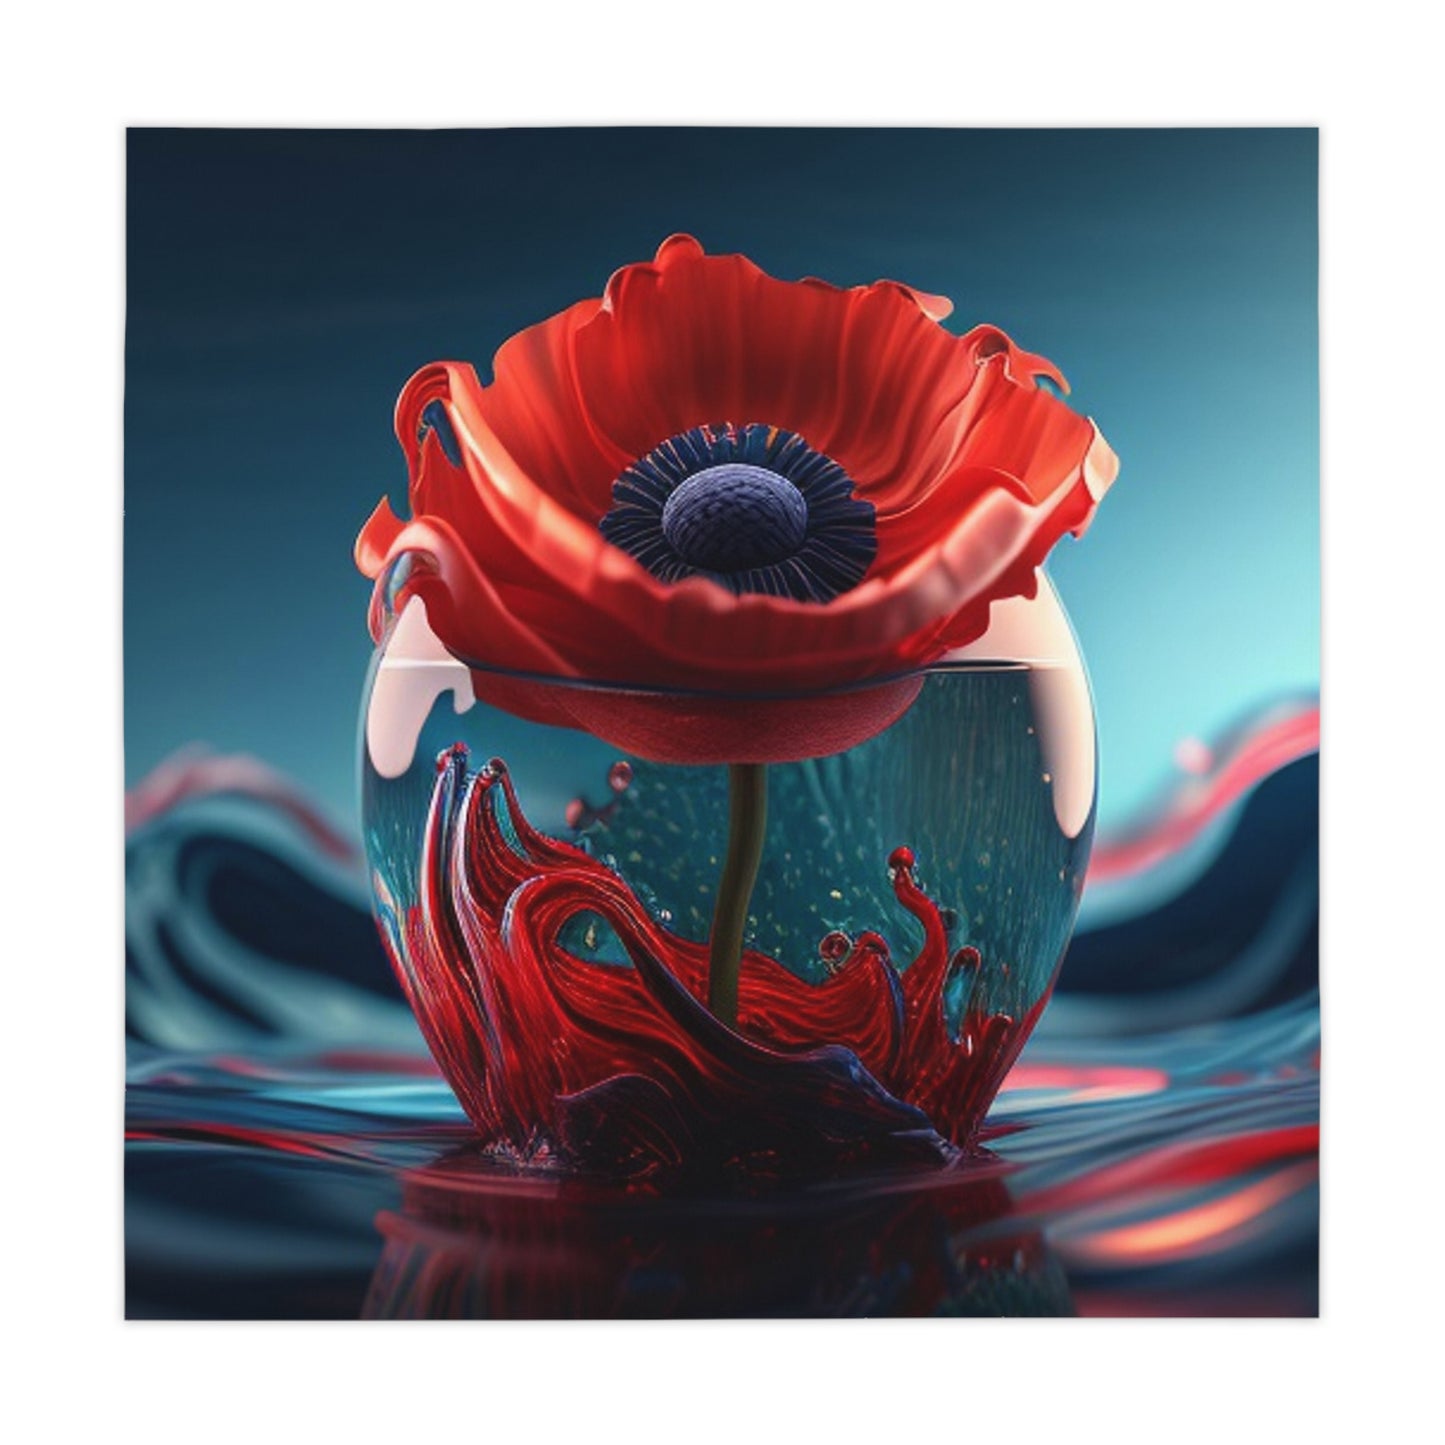 Tablecloth Red Anemone in a Vase 2